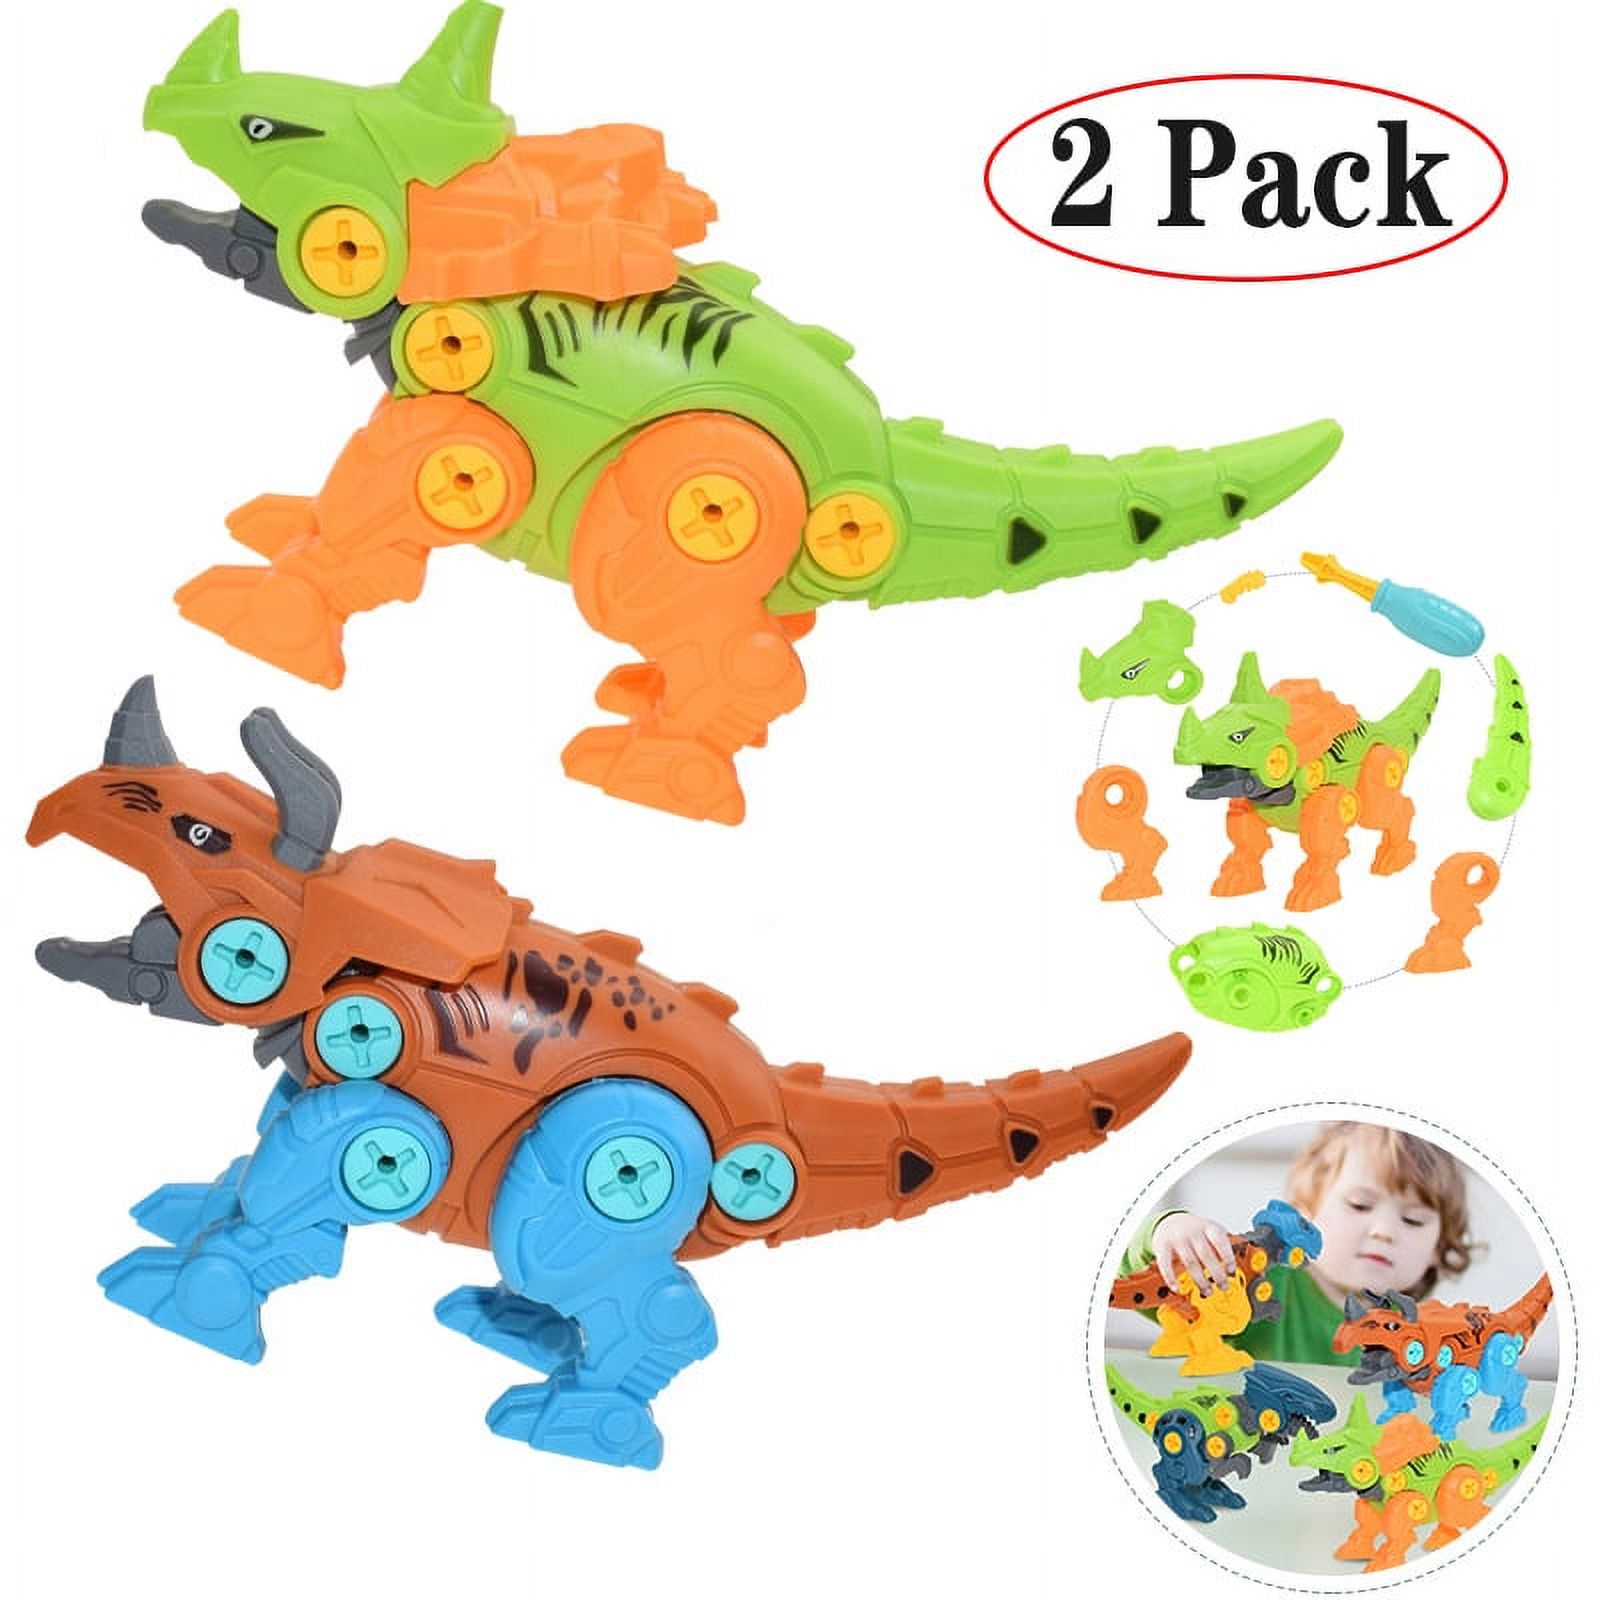 Amerteer Dinosaur 2Pcs STEM Toys, Take Apart Fun Construction Engineering Building Toys Sets Blocks Colorful Dino Easter Egg Decorator for Boys Girls Toddle Best Toy Gift Kids Ages 3+ Year Old - image 1 of 8